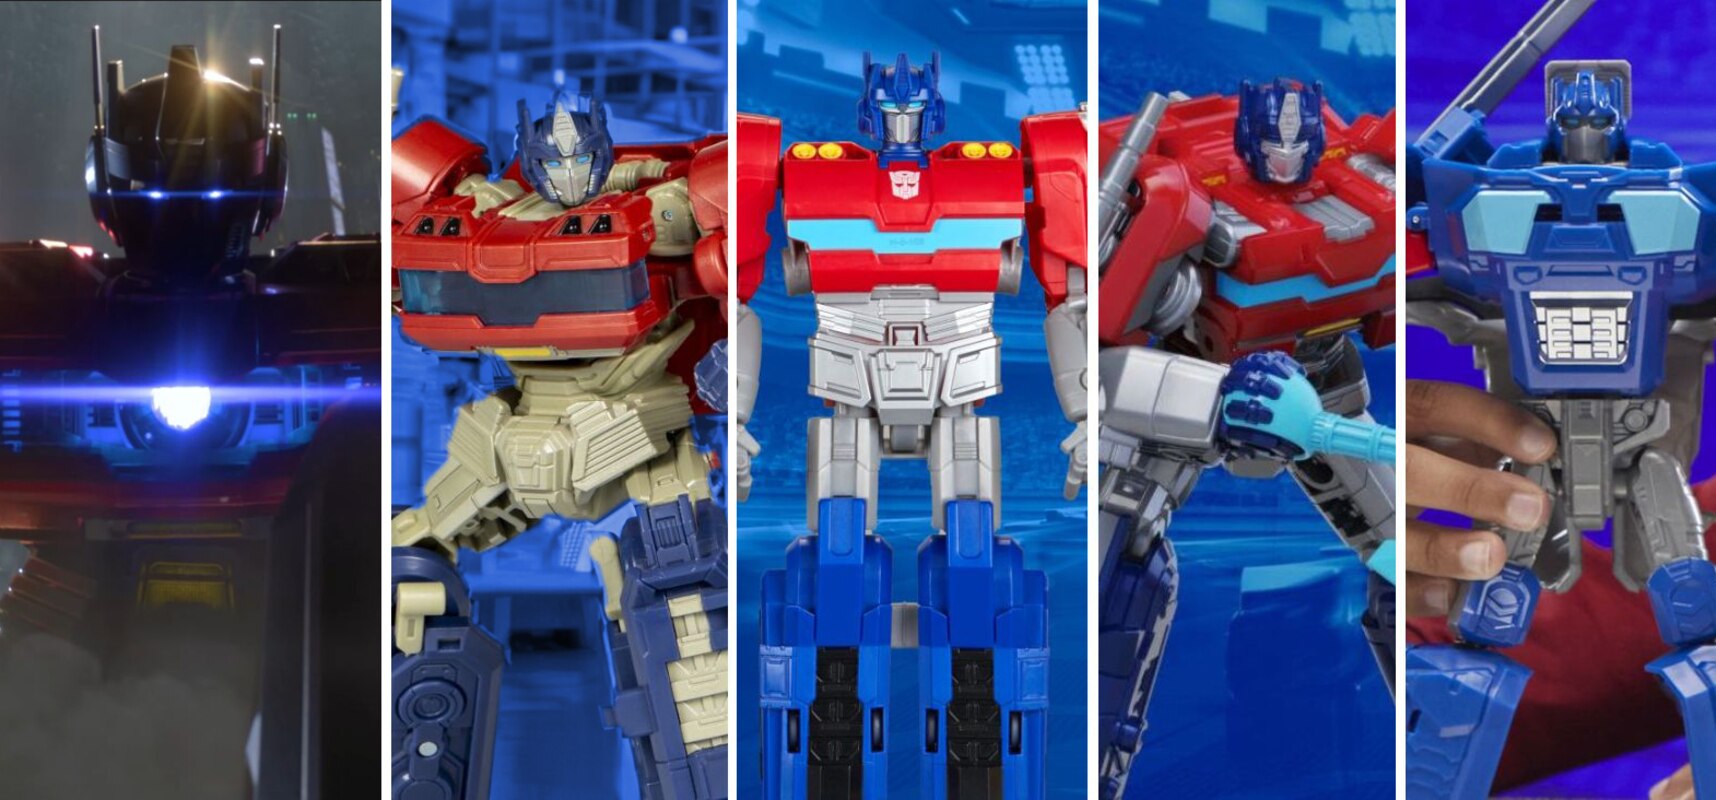 Daily Prime - Transformers: ONE Optimus Prime Character & Toys First Look